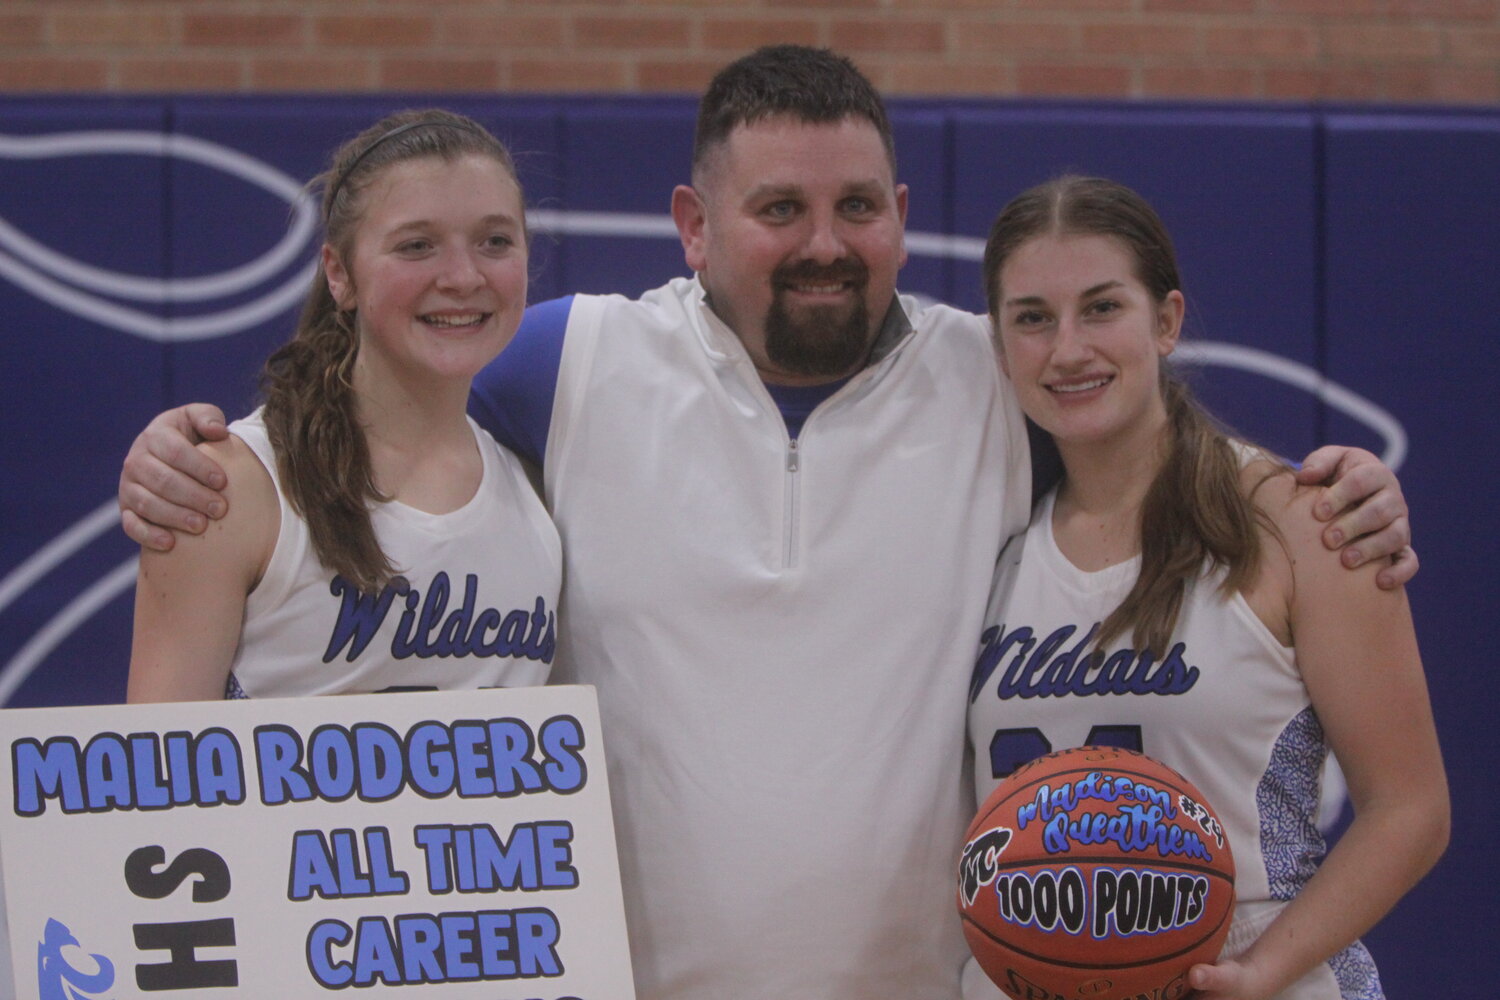 Montgomery County seniors Malia Rodgers and Maddy Queathem pose with coach Joe Basinger after the Wildcats defeated Van-Far on Tuesday. Rodgers broke the all-time career scoring record, while Queathem hit the 1,000-point mark.